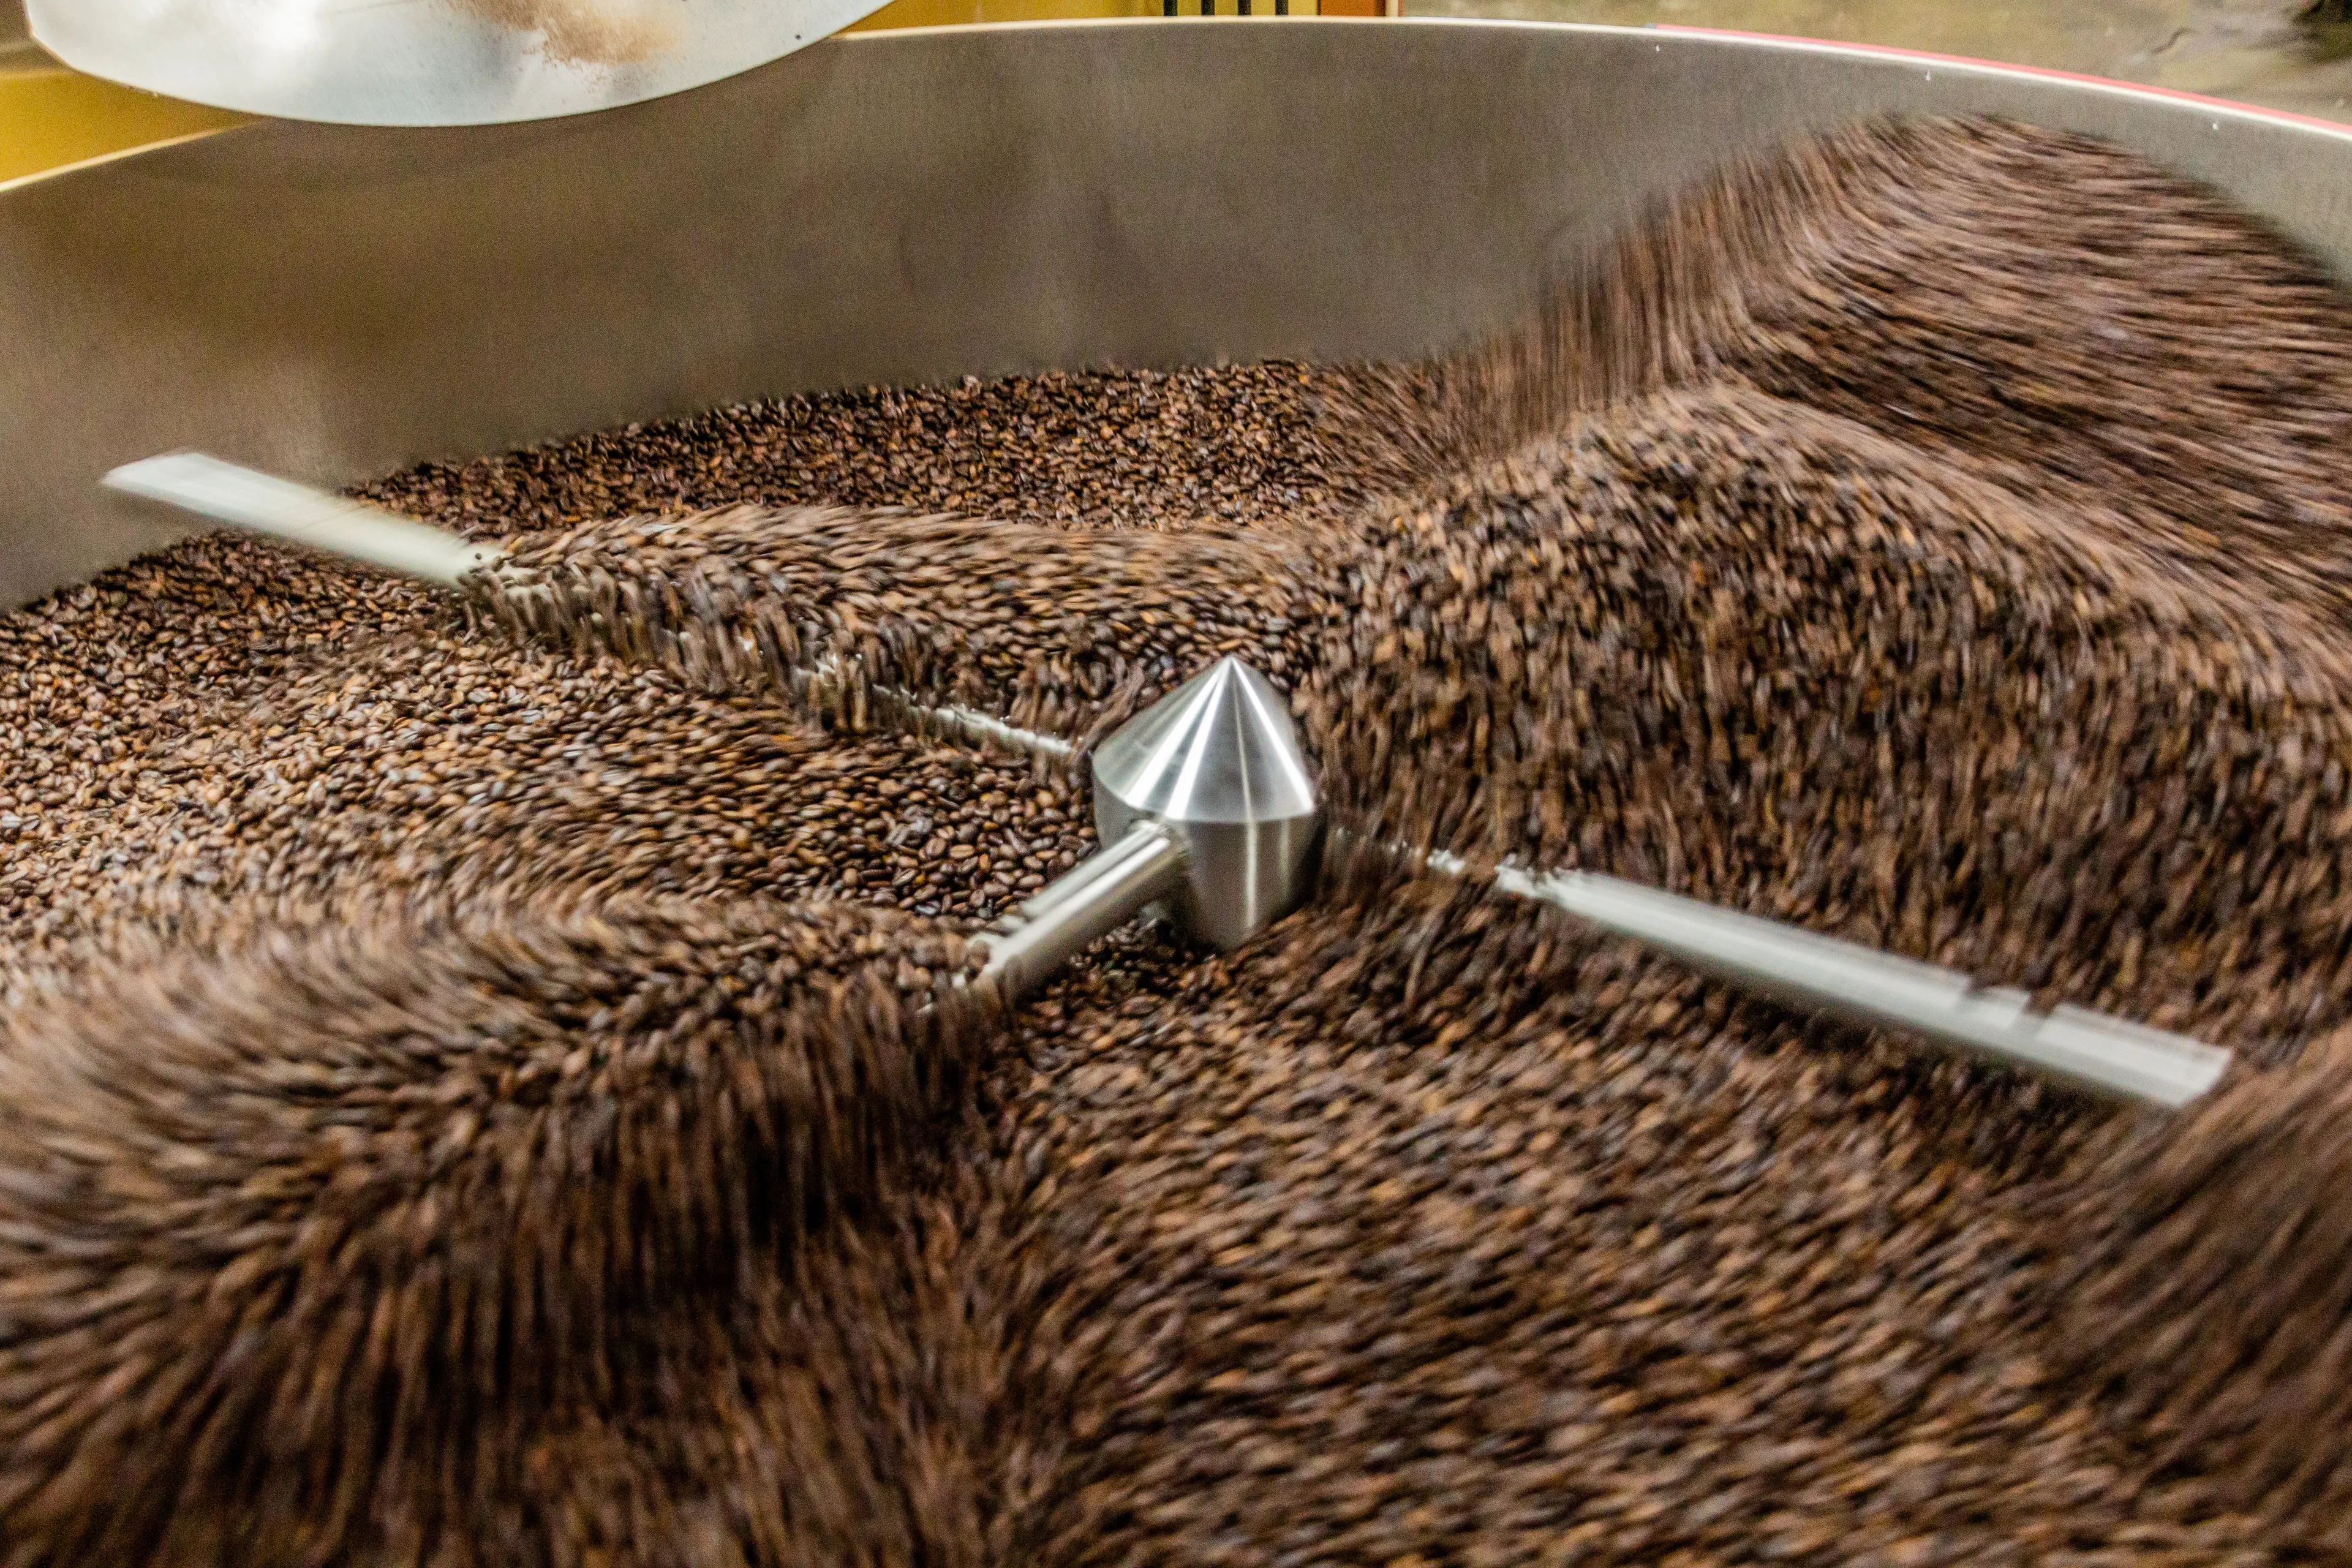 Coffee beans being roasted